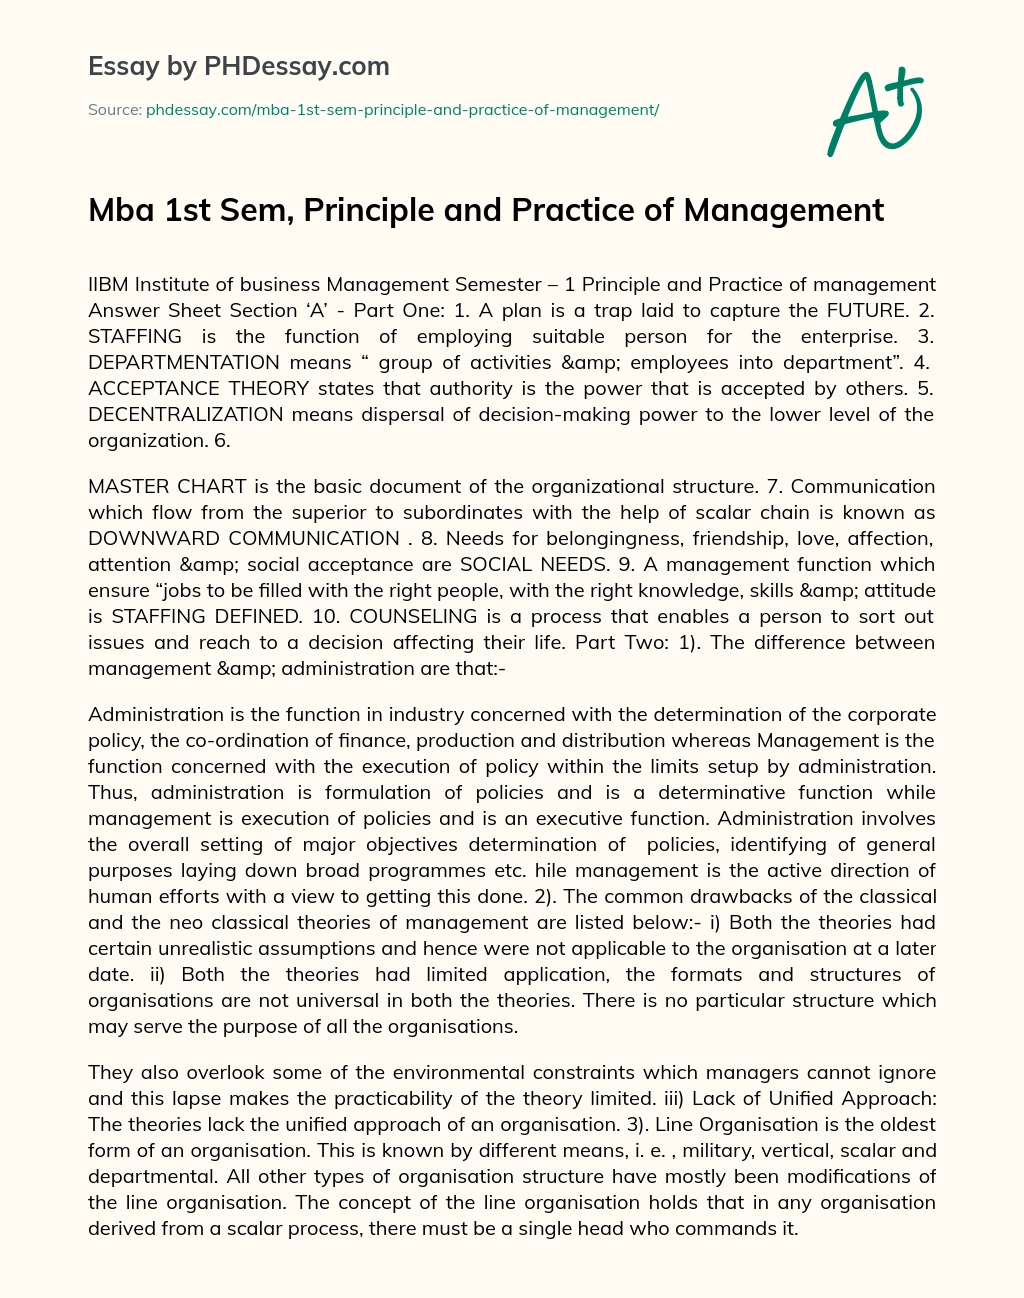 Mba 1st Sem, Principle and Practice of Management essay